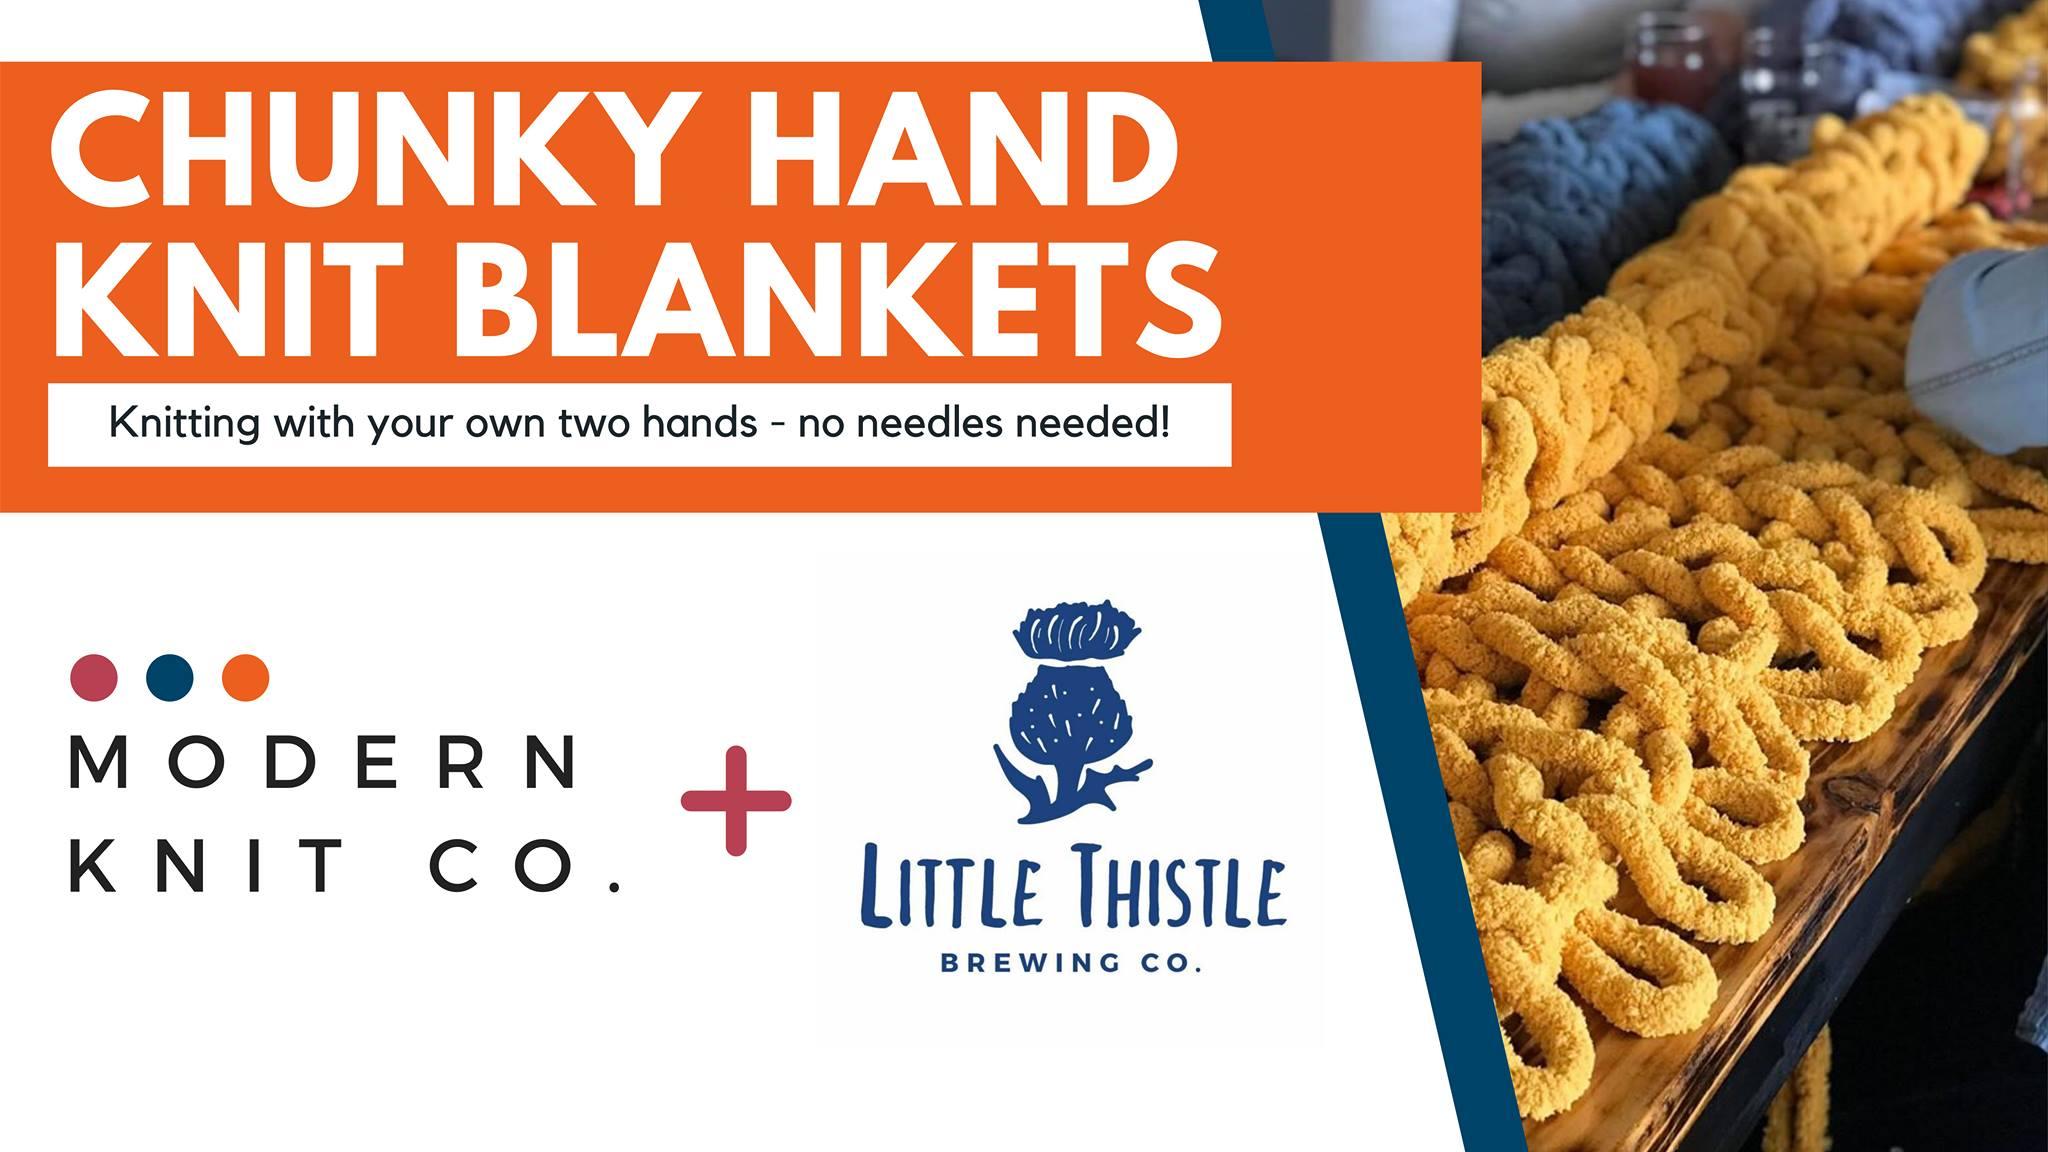 Chunky Hand Knit Blankets at Little Thistle (April 2)